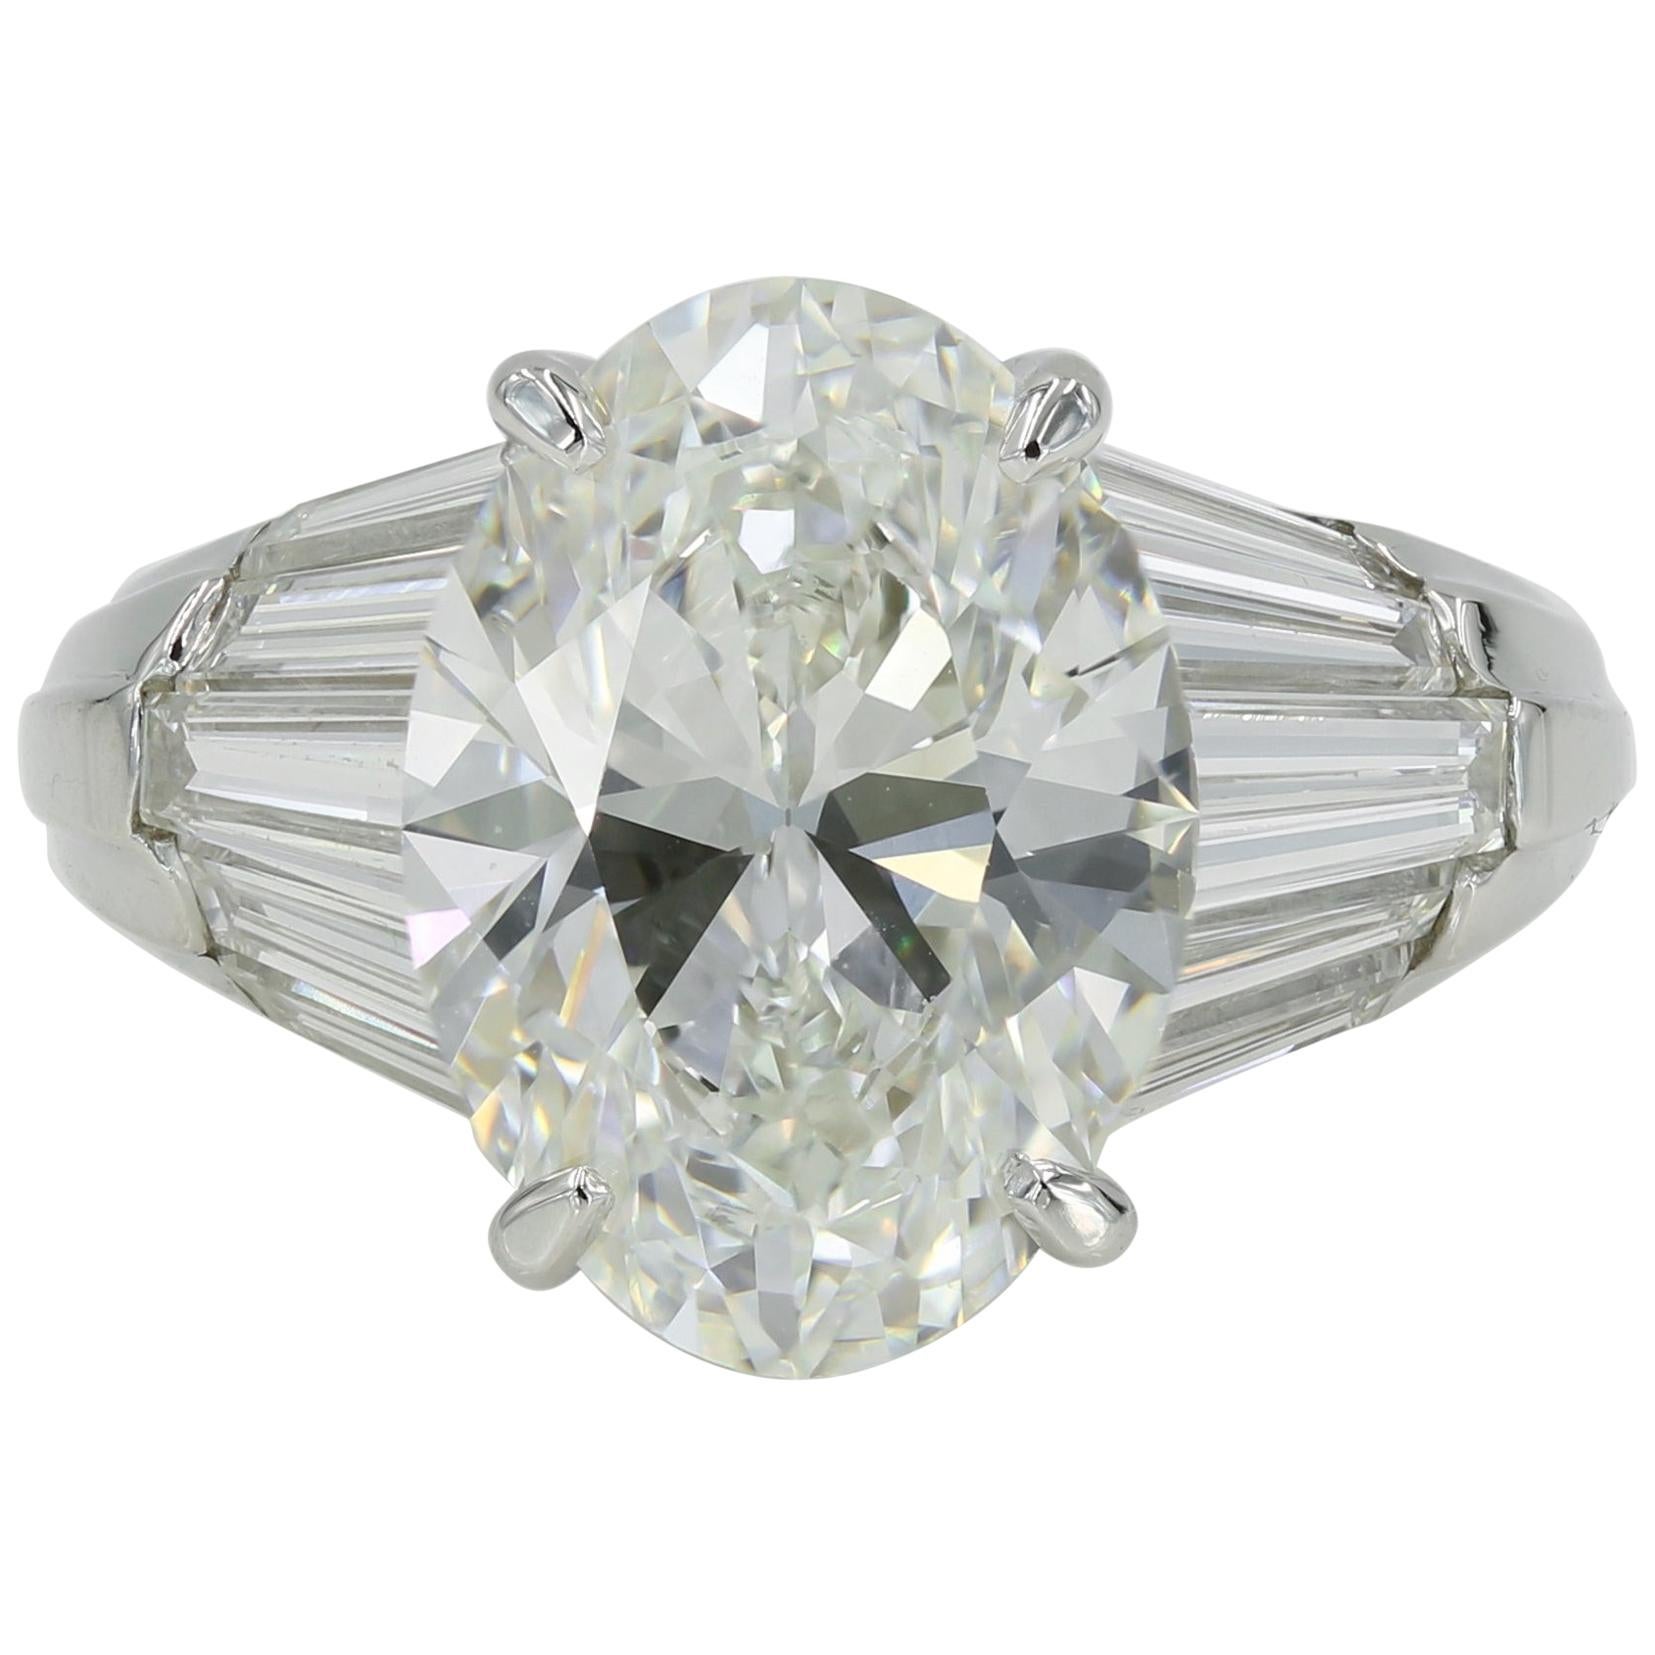 Lester Lampert 5.05 Carat Oval Cut Diamond Ring, G / VS1 with GIA Papers in Plat